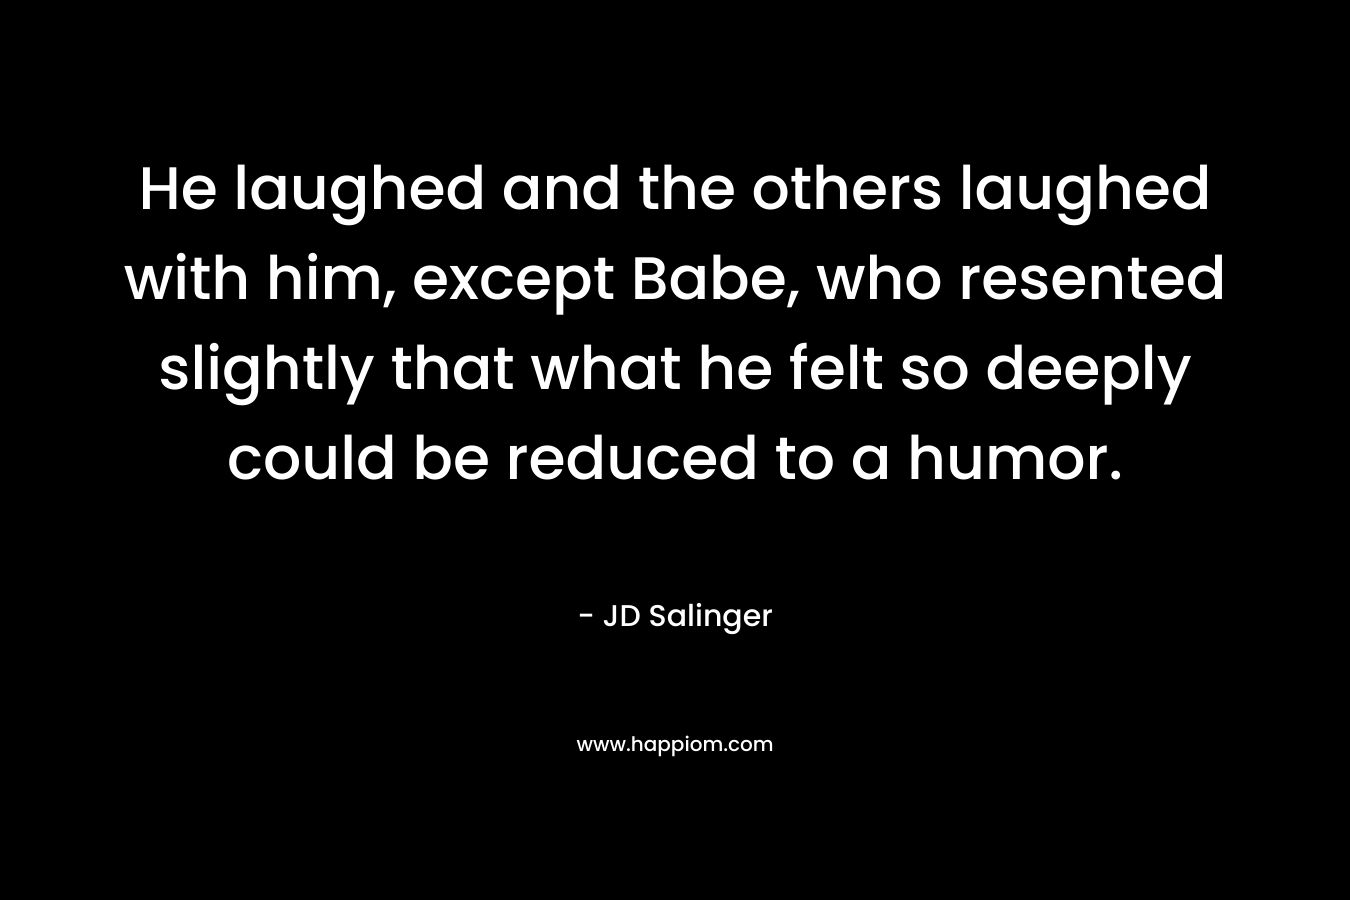 He laughed and the others laughed with him, except Babe, who resented slightly that what he felt so deeply could be reduced to a humor. – JD Salinger